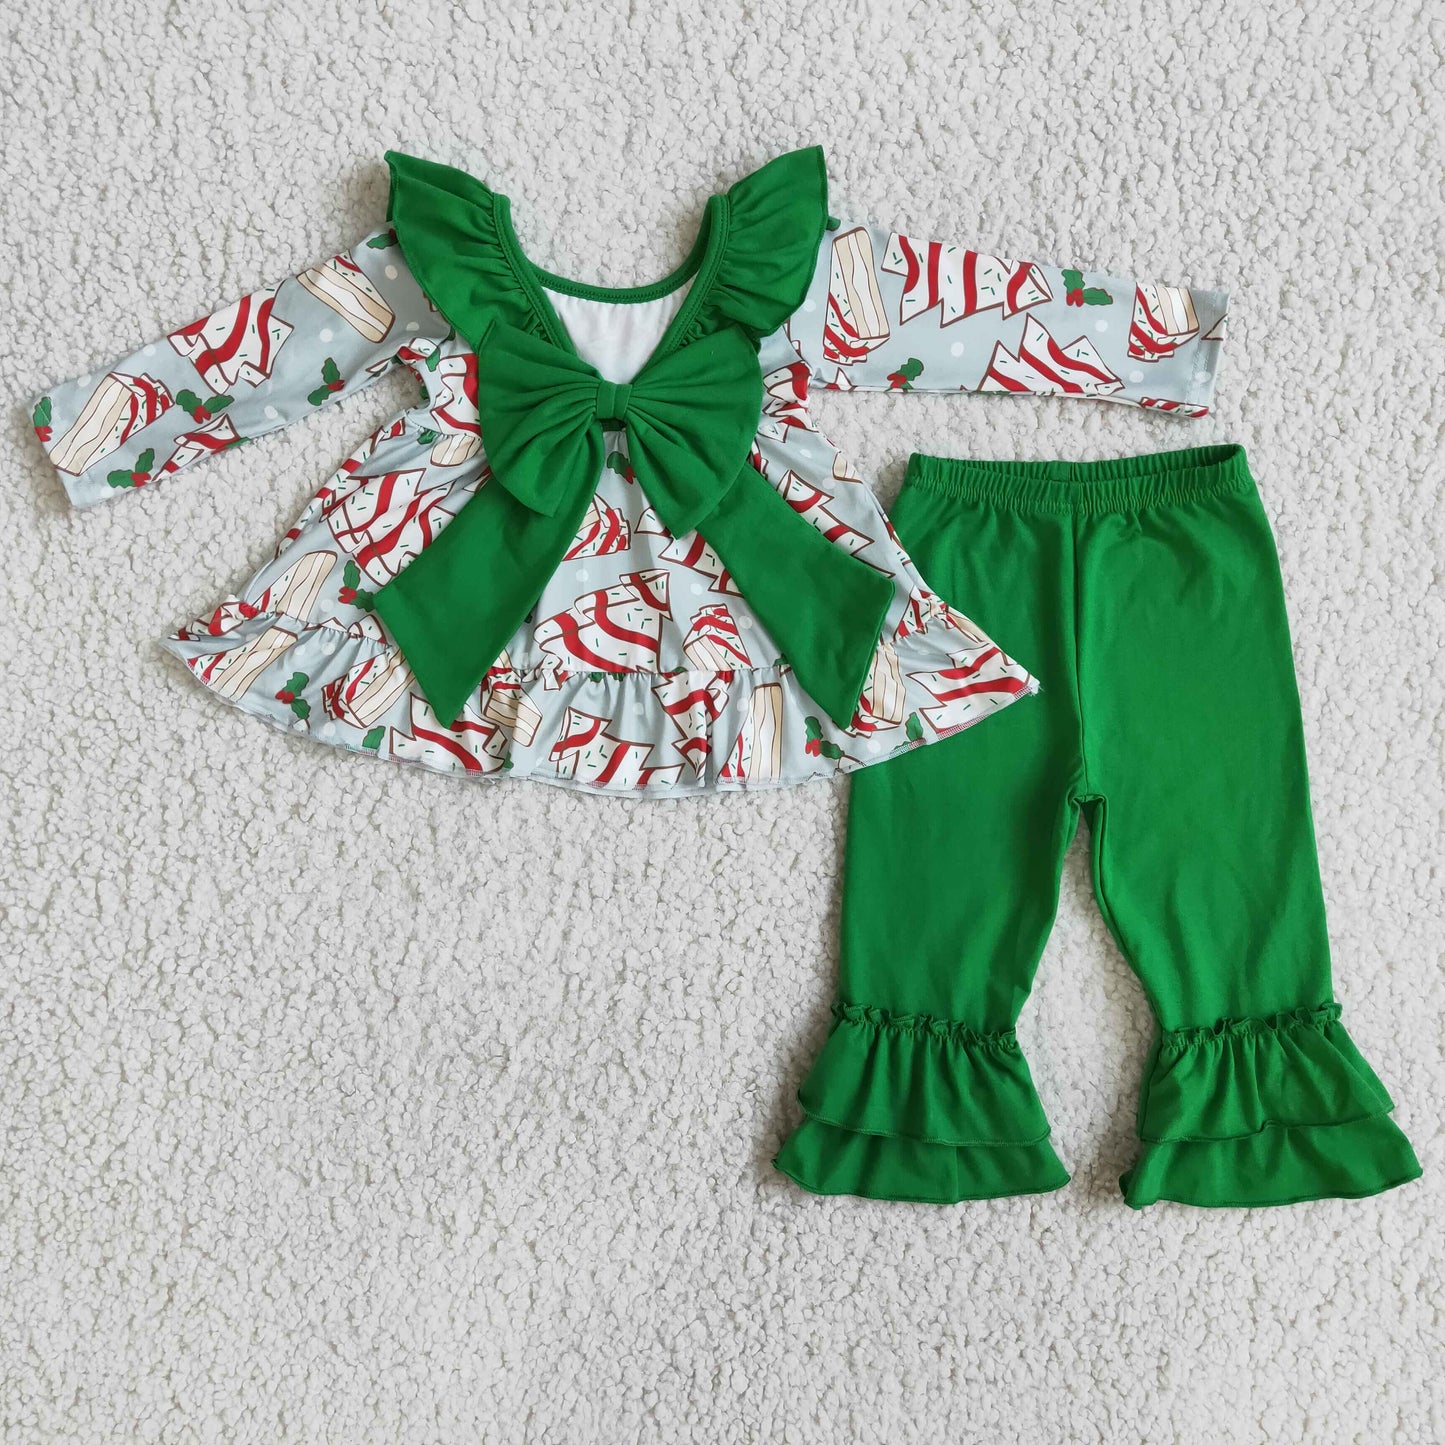 Christmas tree cakes backless tunic green pants girls boutique clothing set